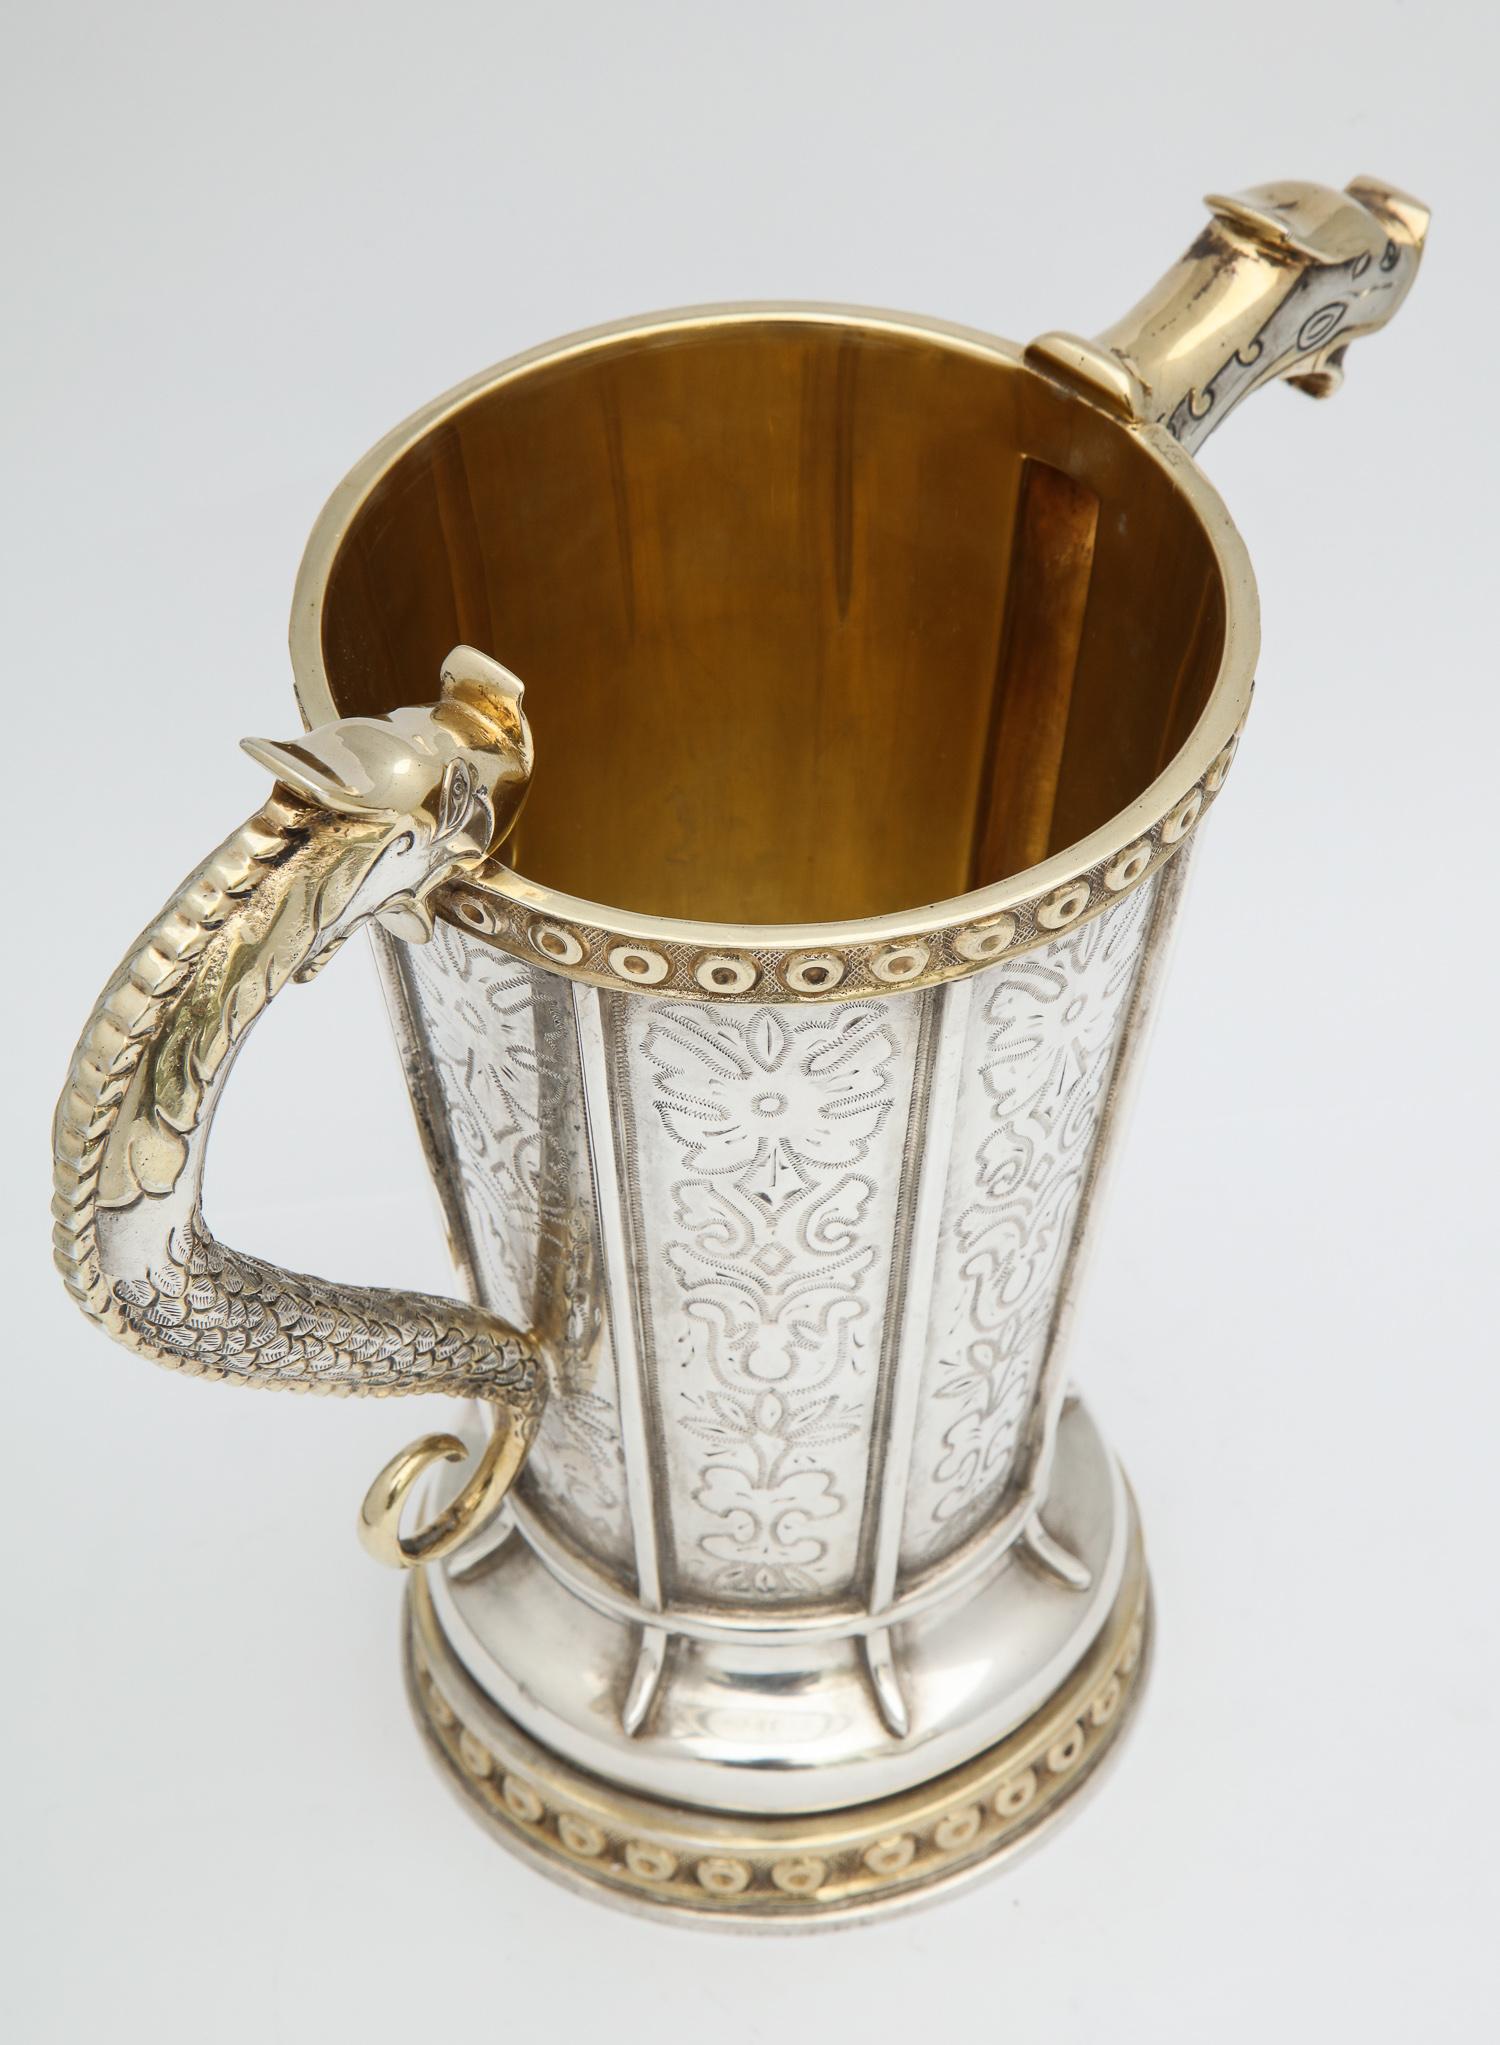 Quetzalcoatl-Inspired Sterling Silver Gilt Pitcher by Tane 11